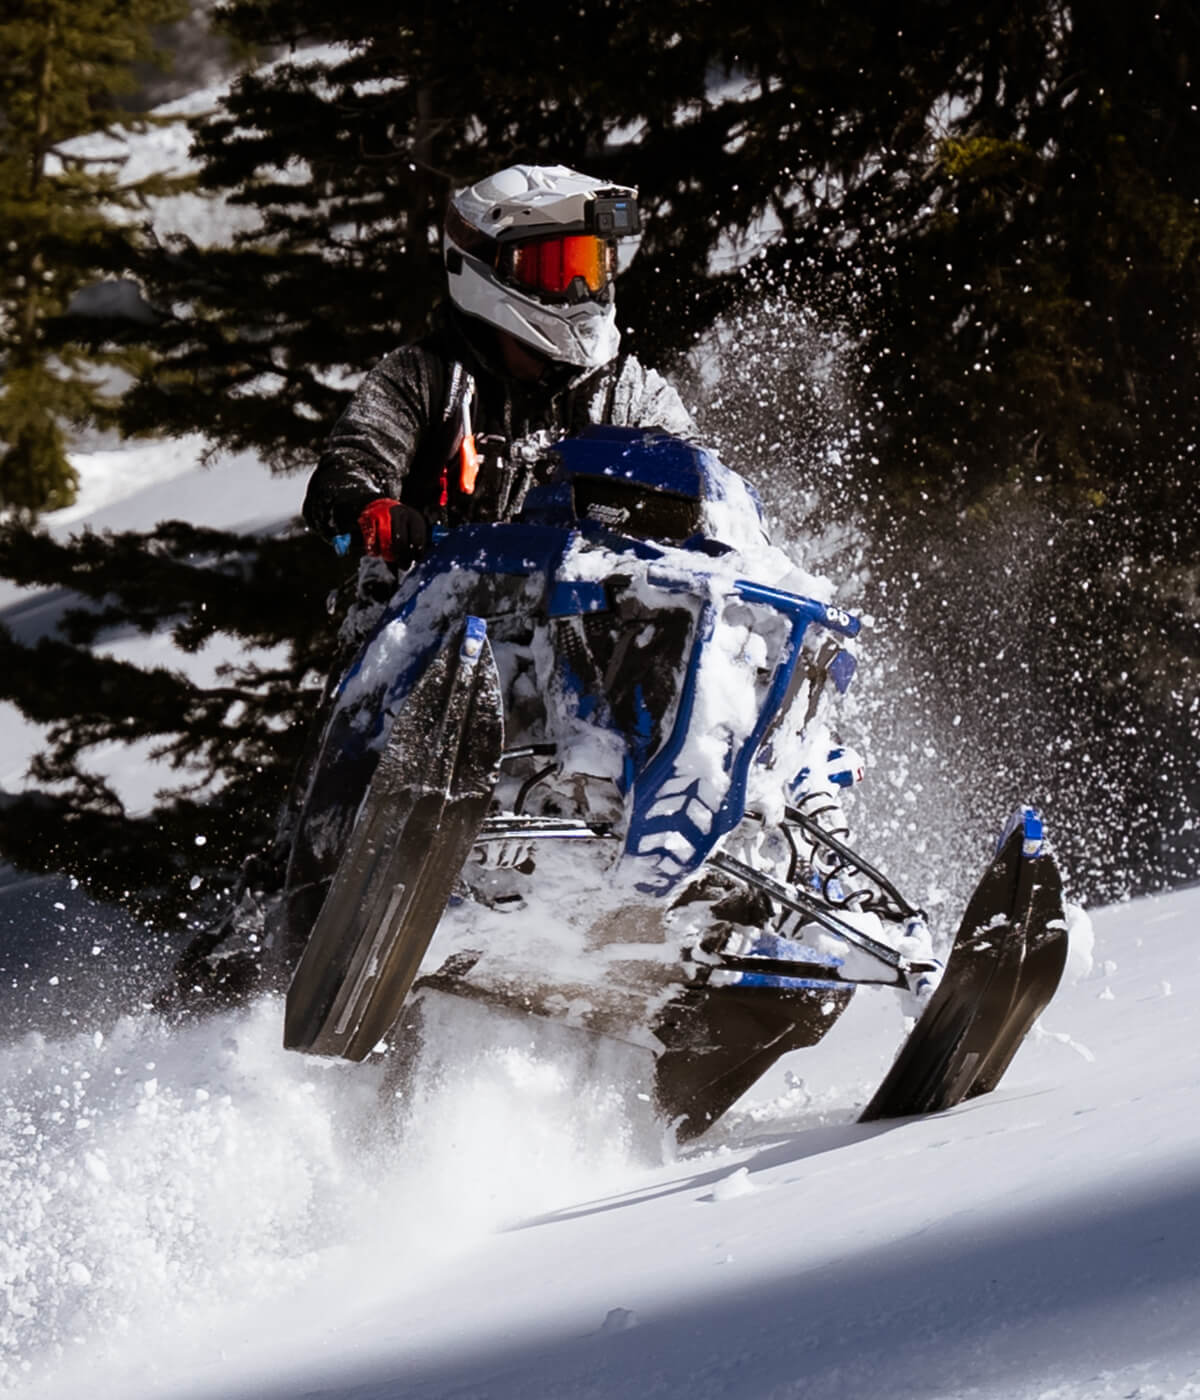 Rider on a snowmobile in the mountains with black TMX C&A Pro mountain skis with blue handles